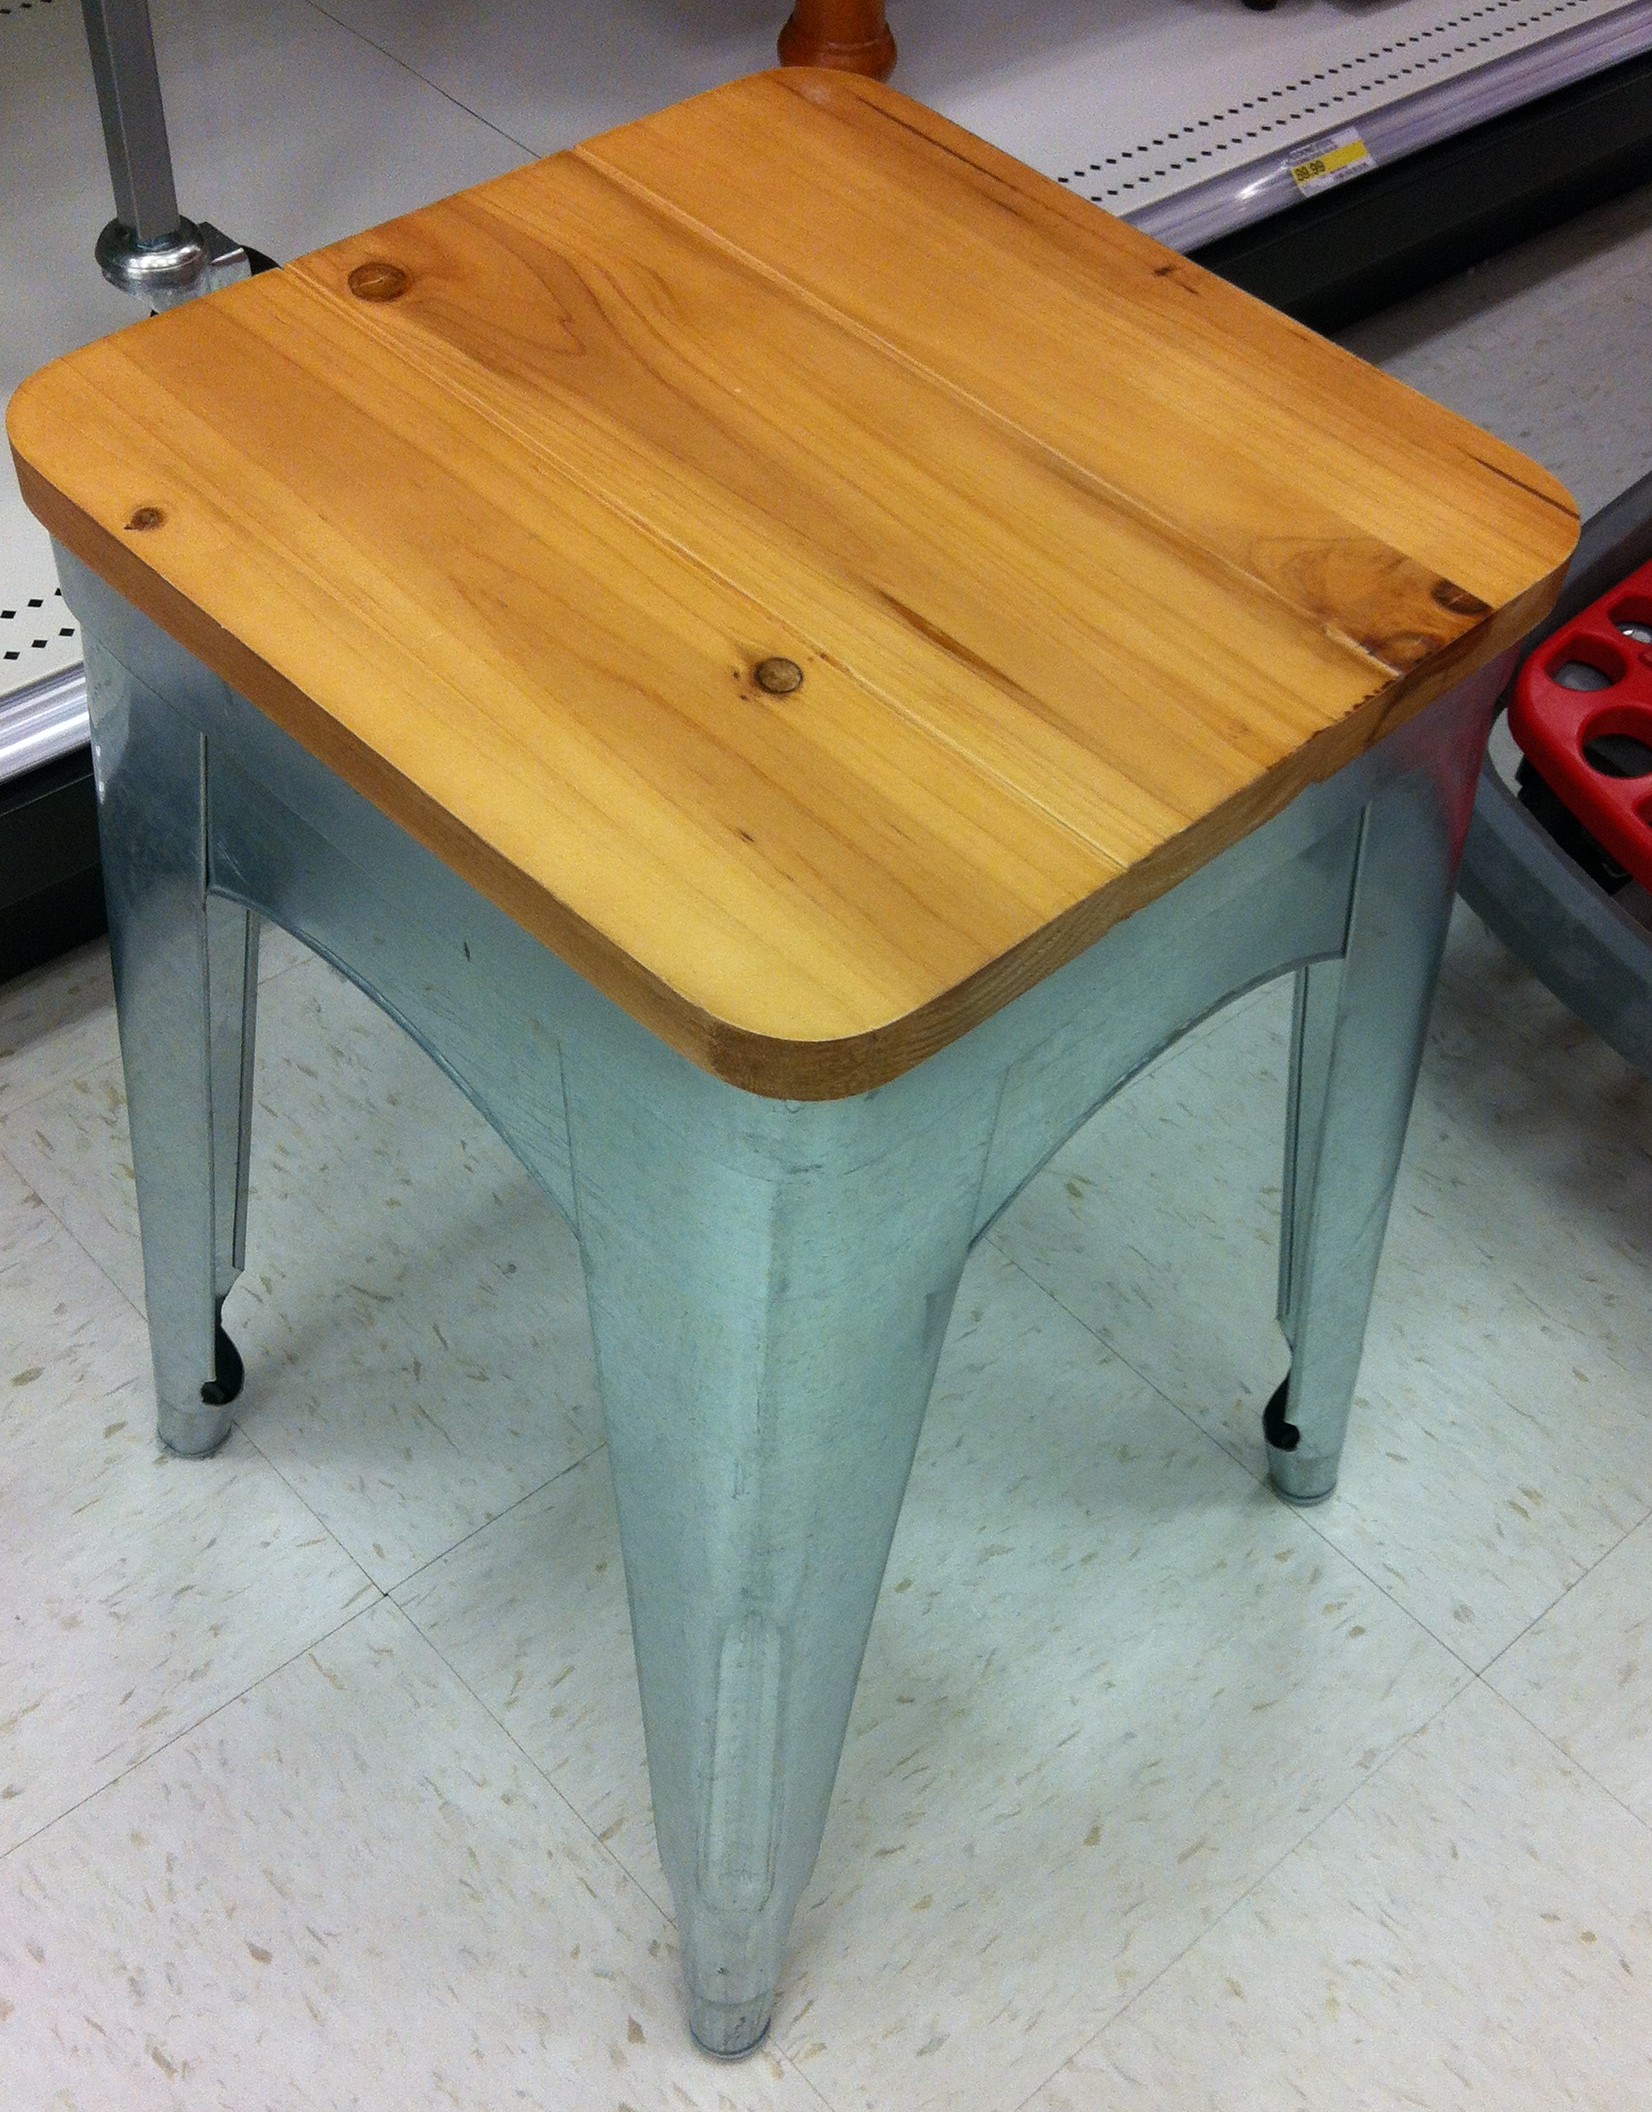 Stool from Target with a wooden top.